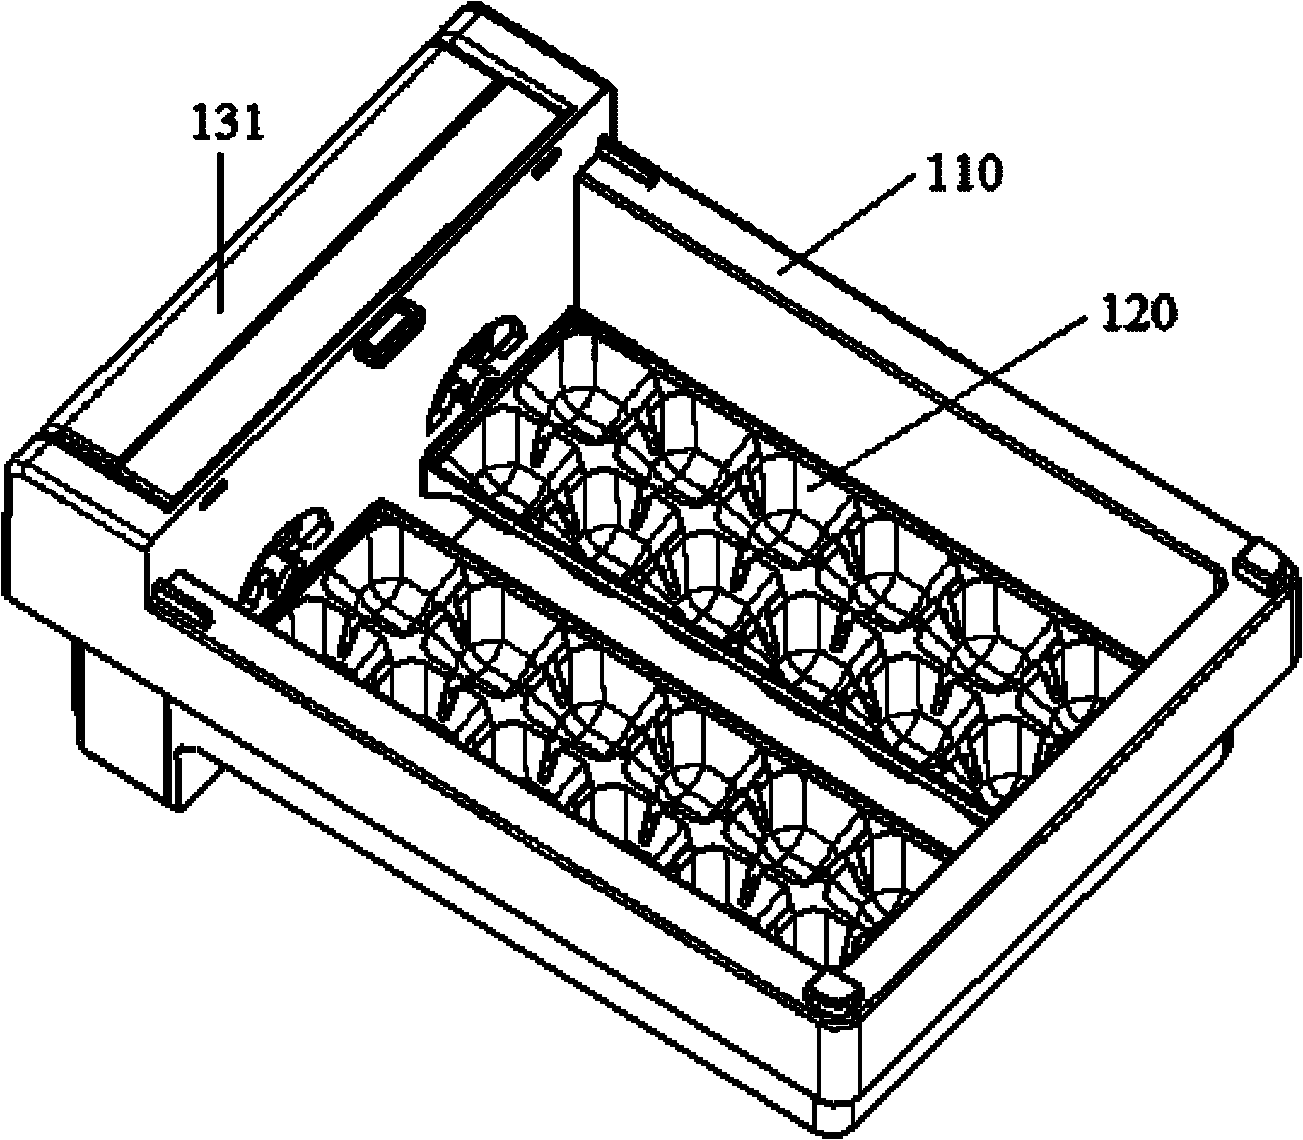 Manual operation ice machine and refrigerator with same